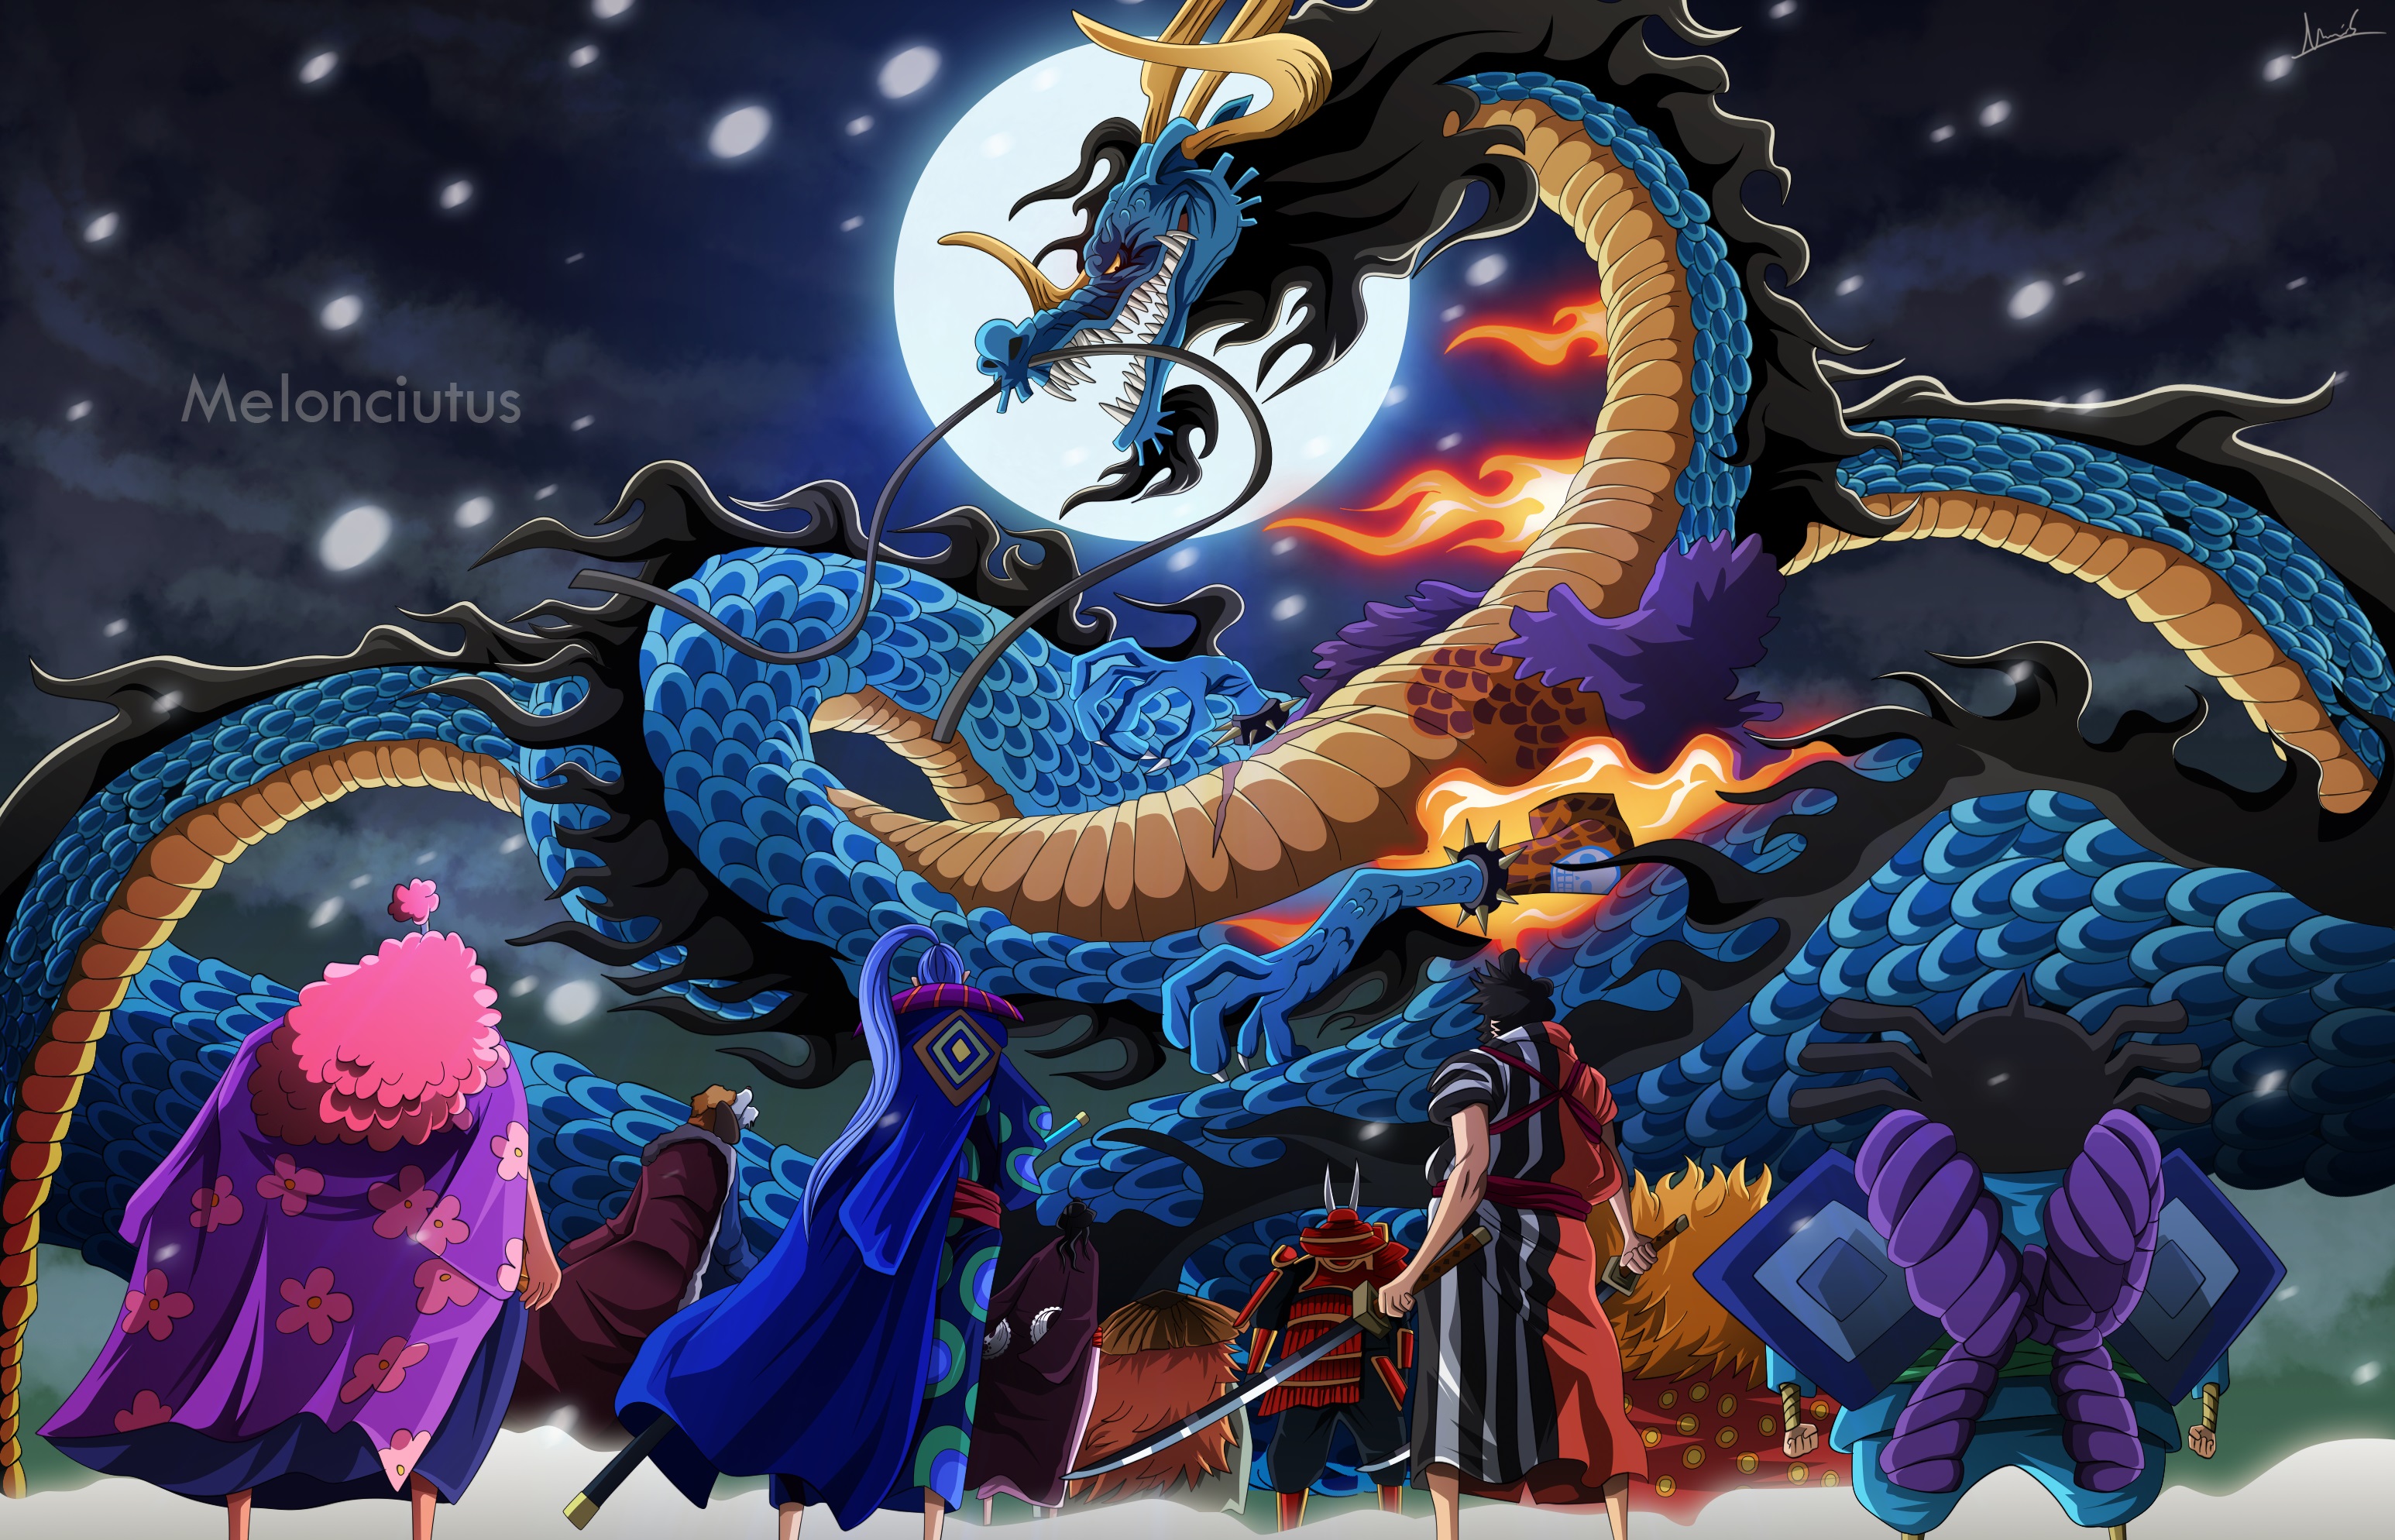 One Piece Kaido Low Angle Anime Cartoon Chinese Dragon Men From Behind Moonlight Sword 3092x1988